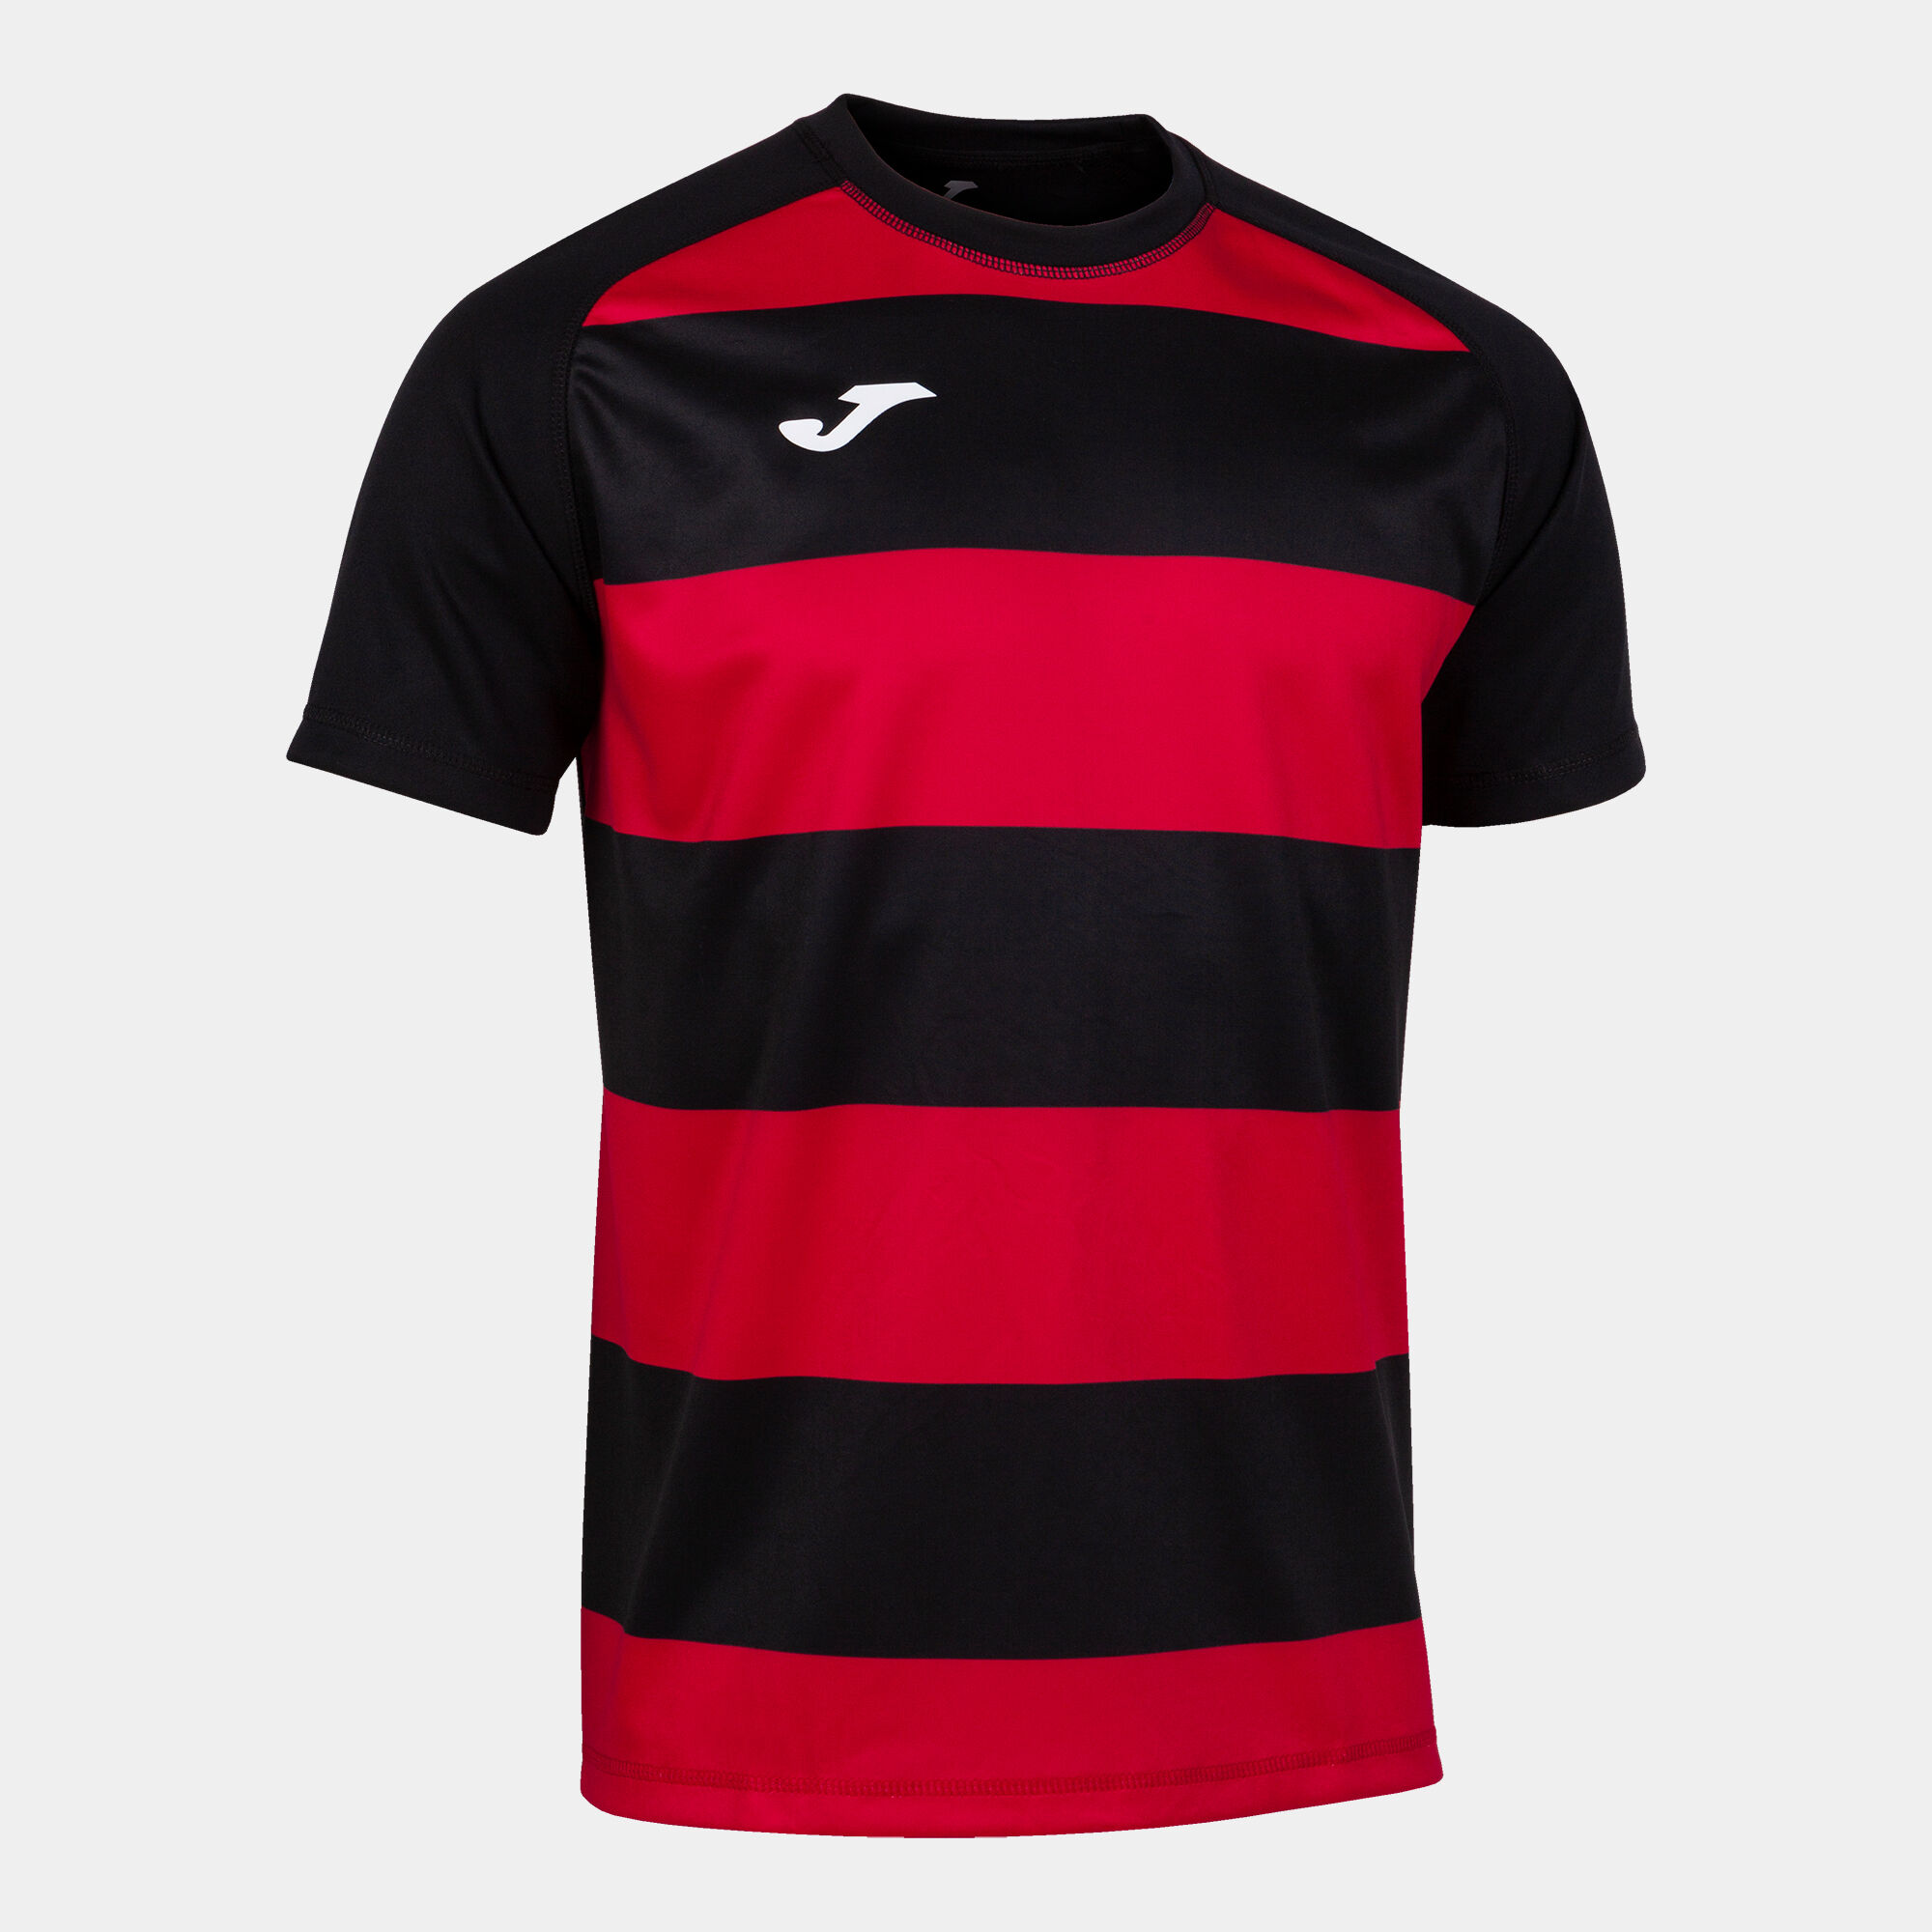 MAILLOT MANCHES COURTES HOMME PRORUGBY II NOIR ROUGE